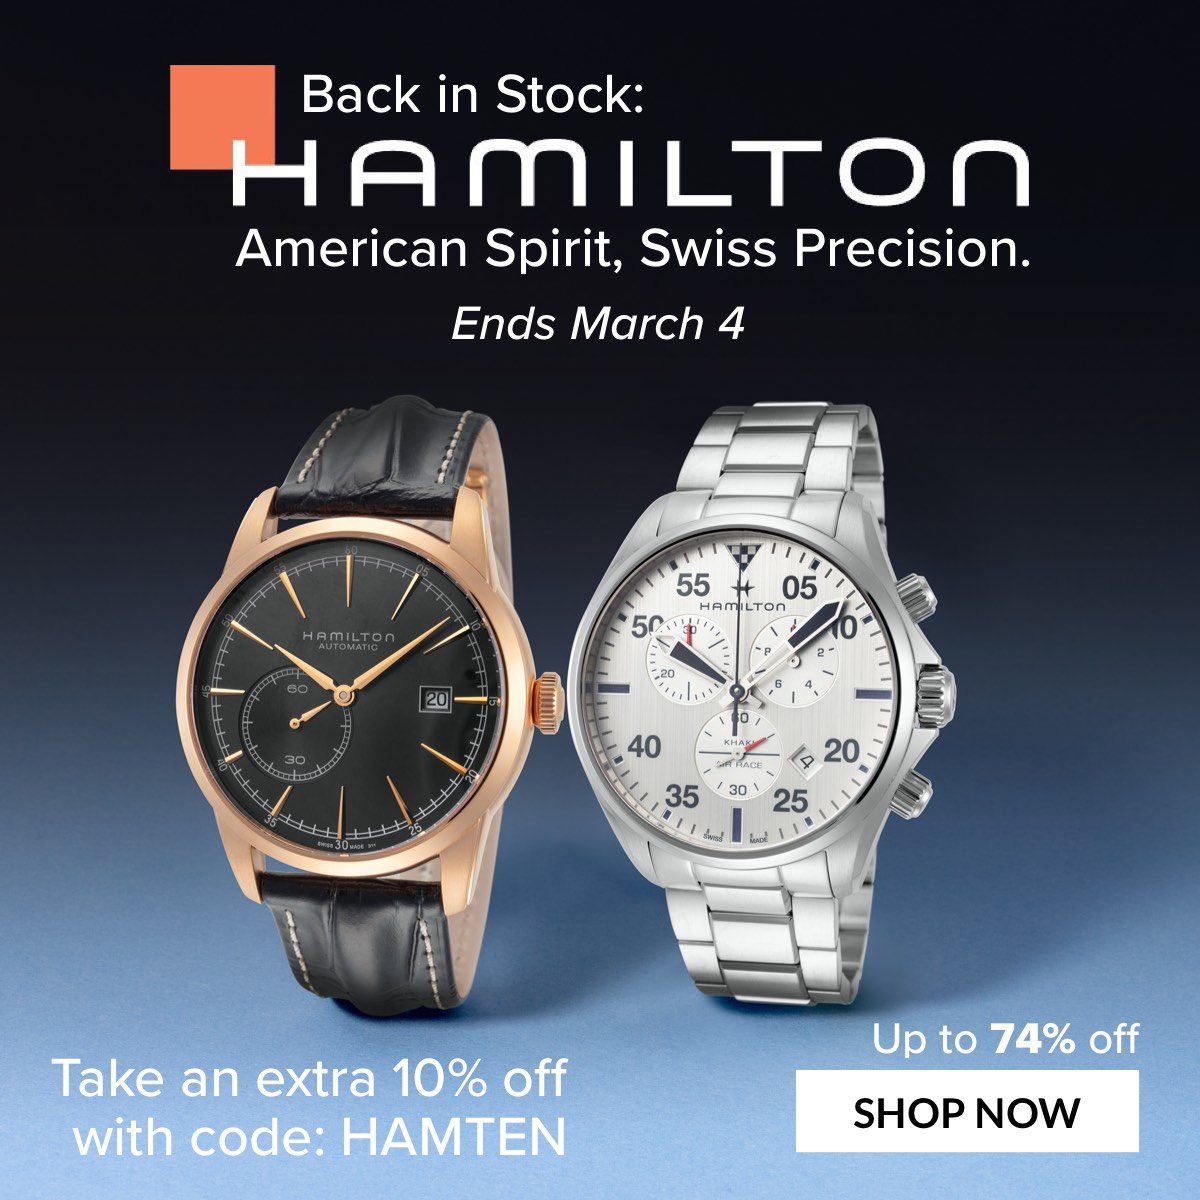 Back in Stock: HAMILTON American Spirit, Swiss Precision Take an extra 10% off with code: HAMTEN Up to 74% off! Ends March 4